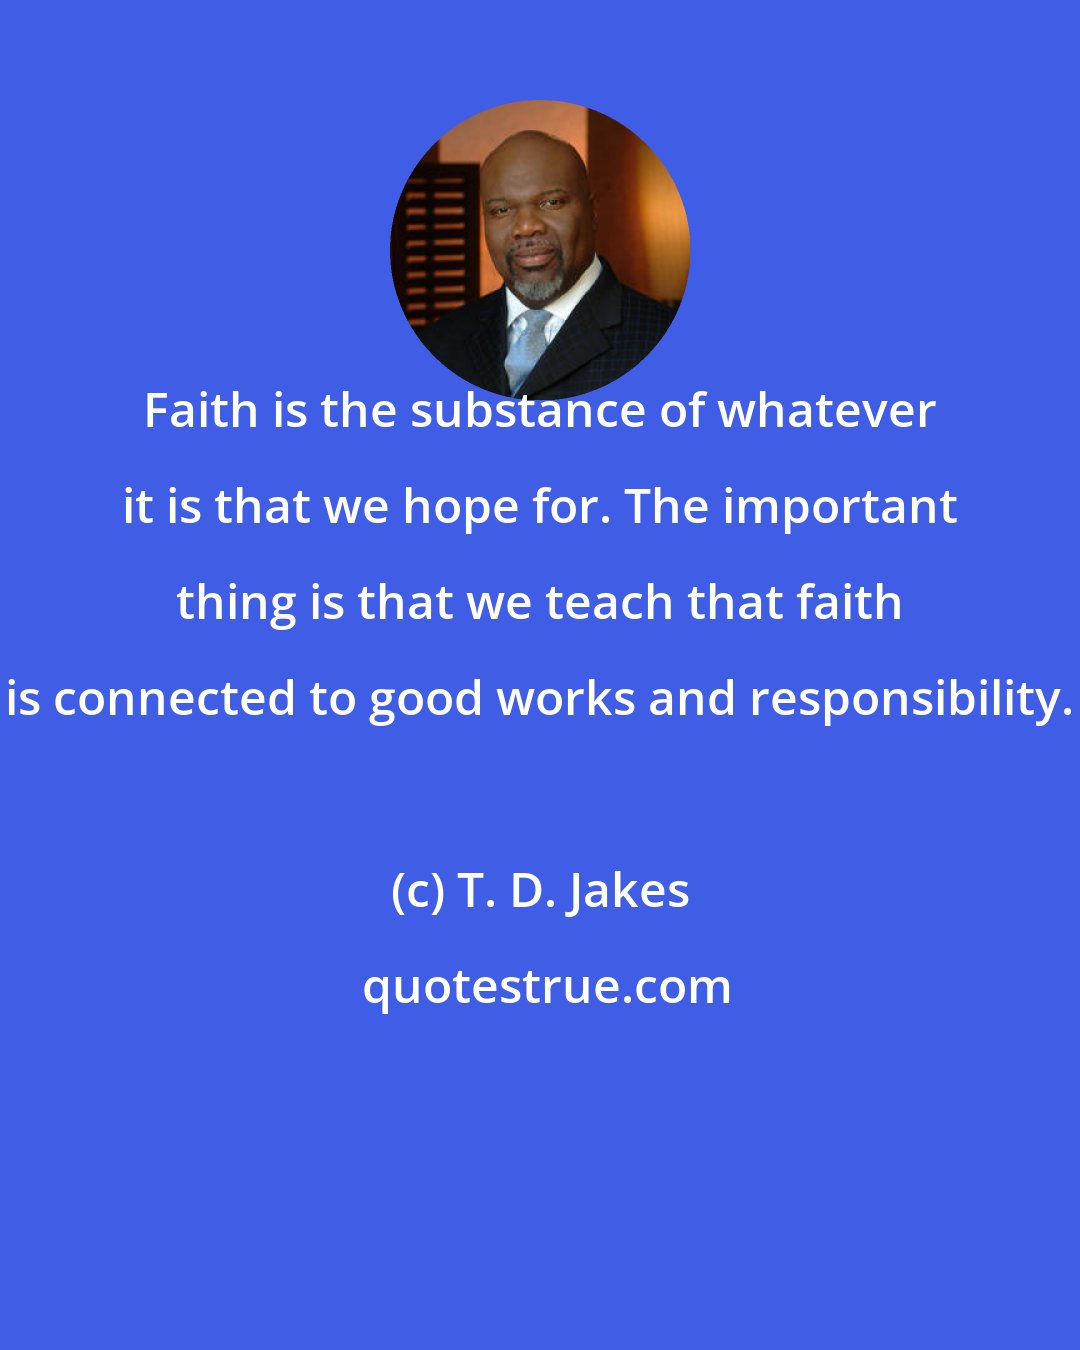 T. D. Jakes: Faith is the substance of whatever it is that we hope for. The important thing is that we teach that faith is connected to good works and responsibility.